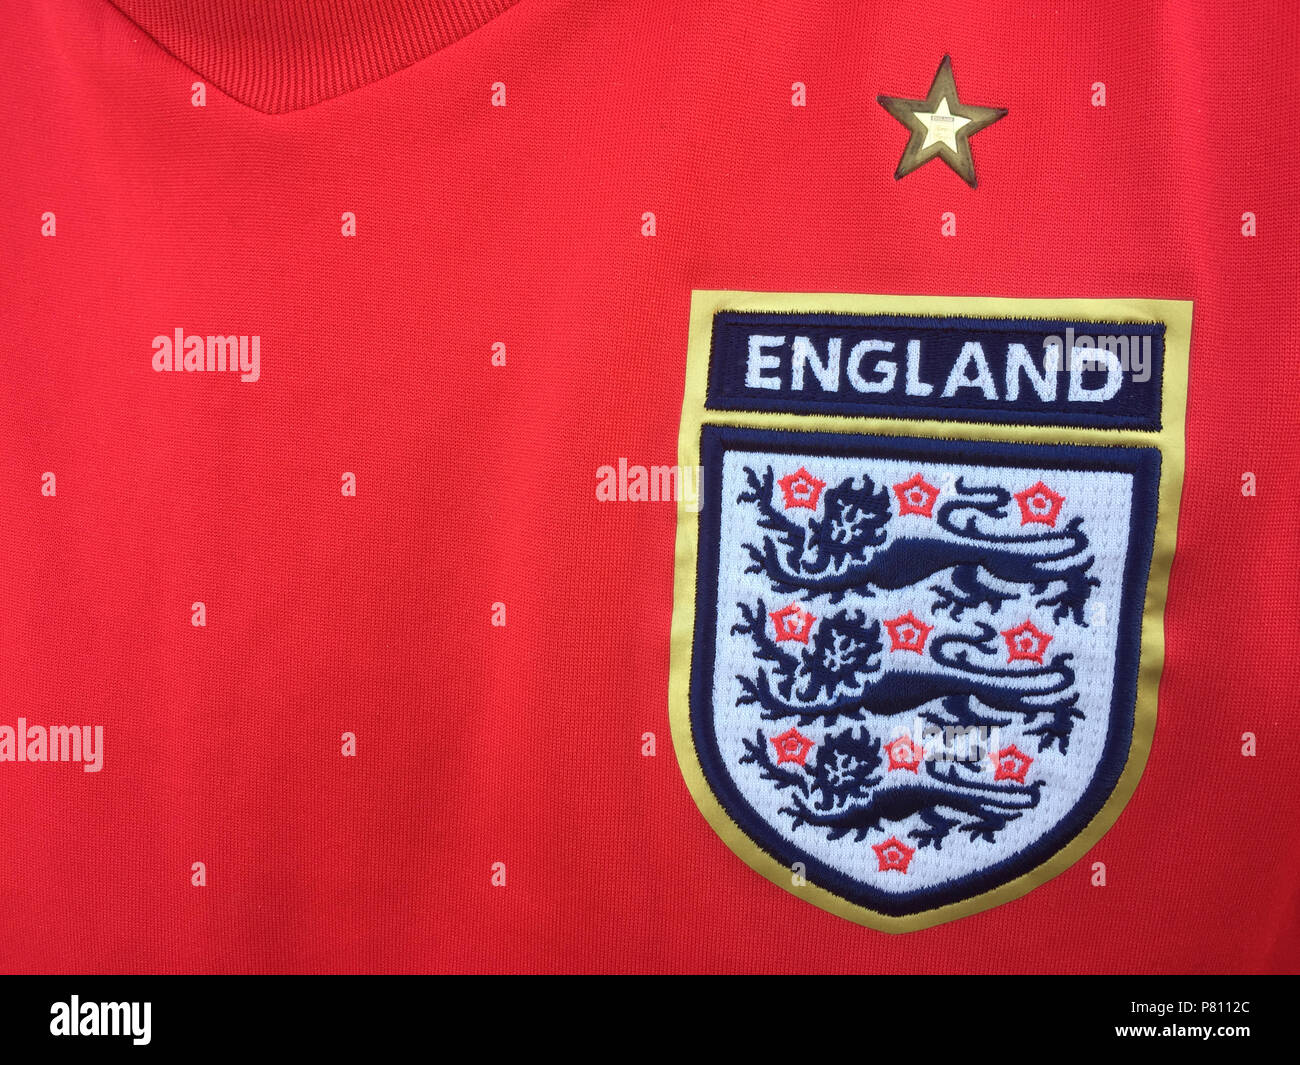 LONDON, UK - JULY 8th 2018: Red England national football shirt with the three lions emblem Stock Photo